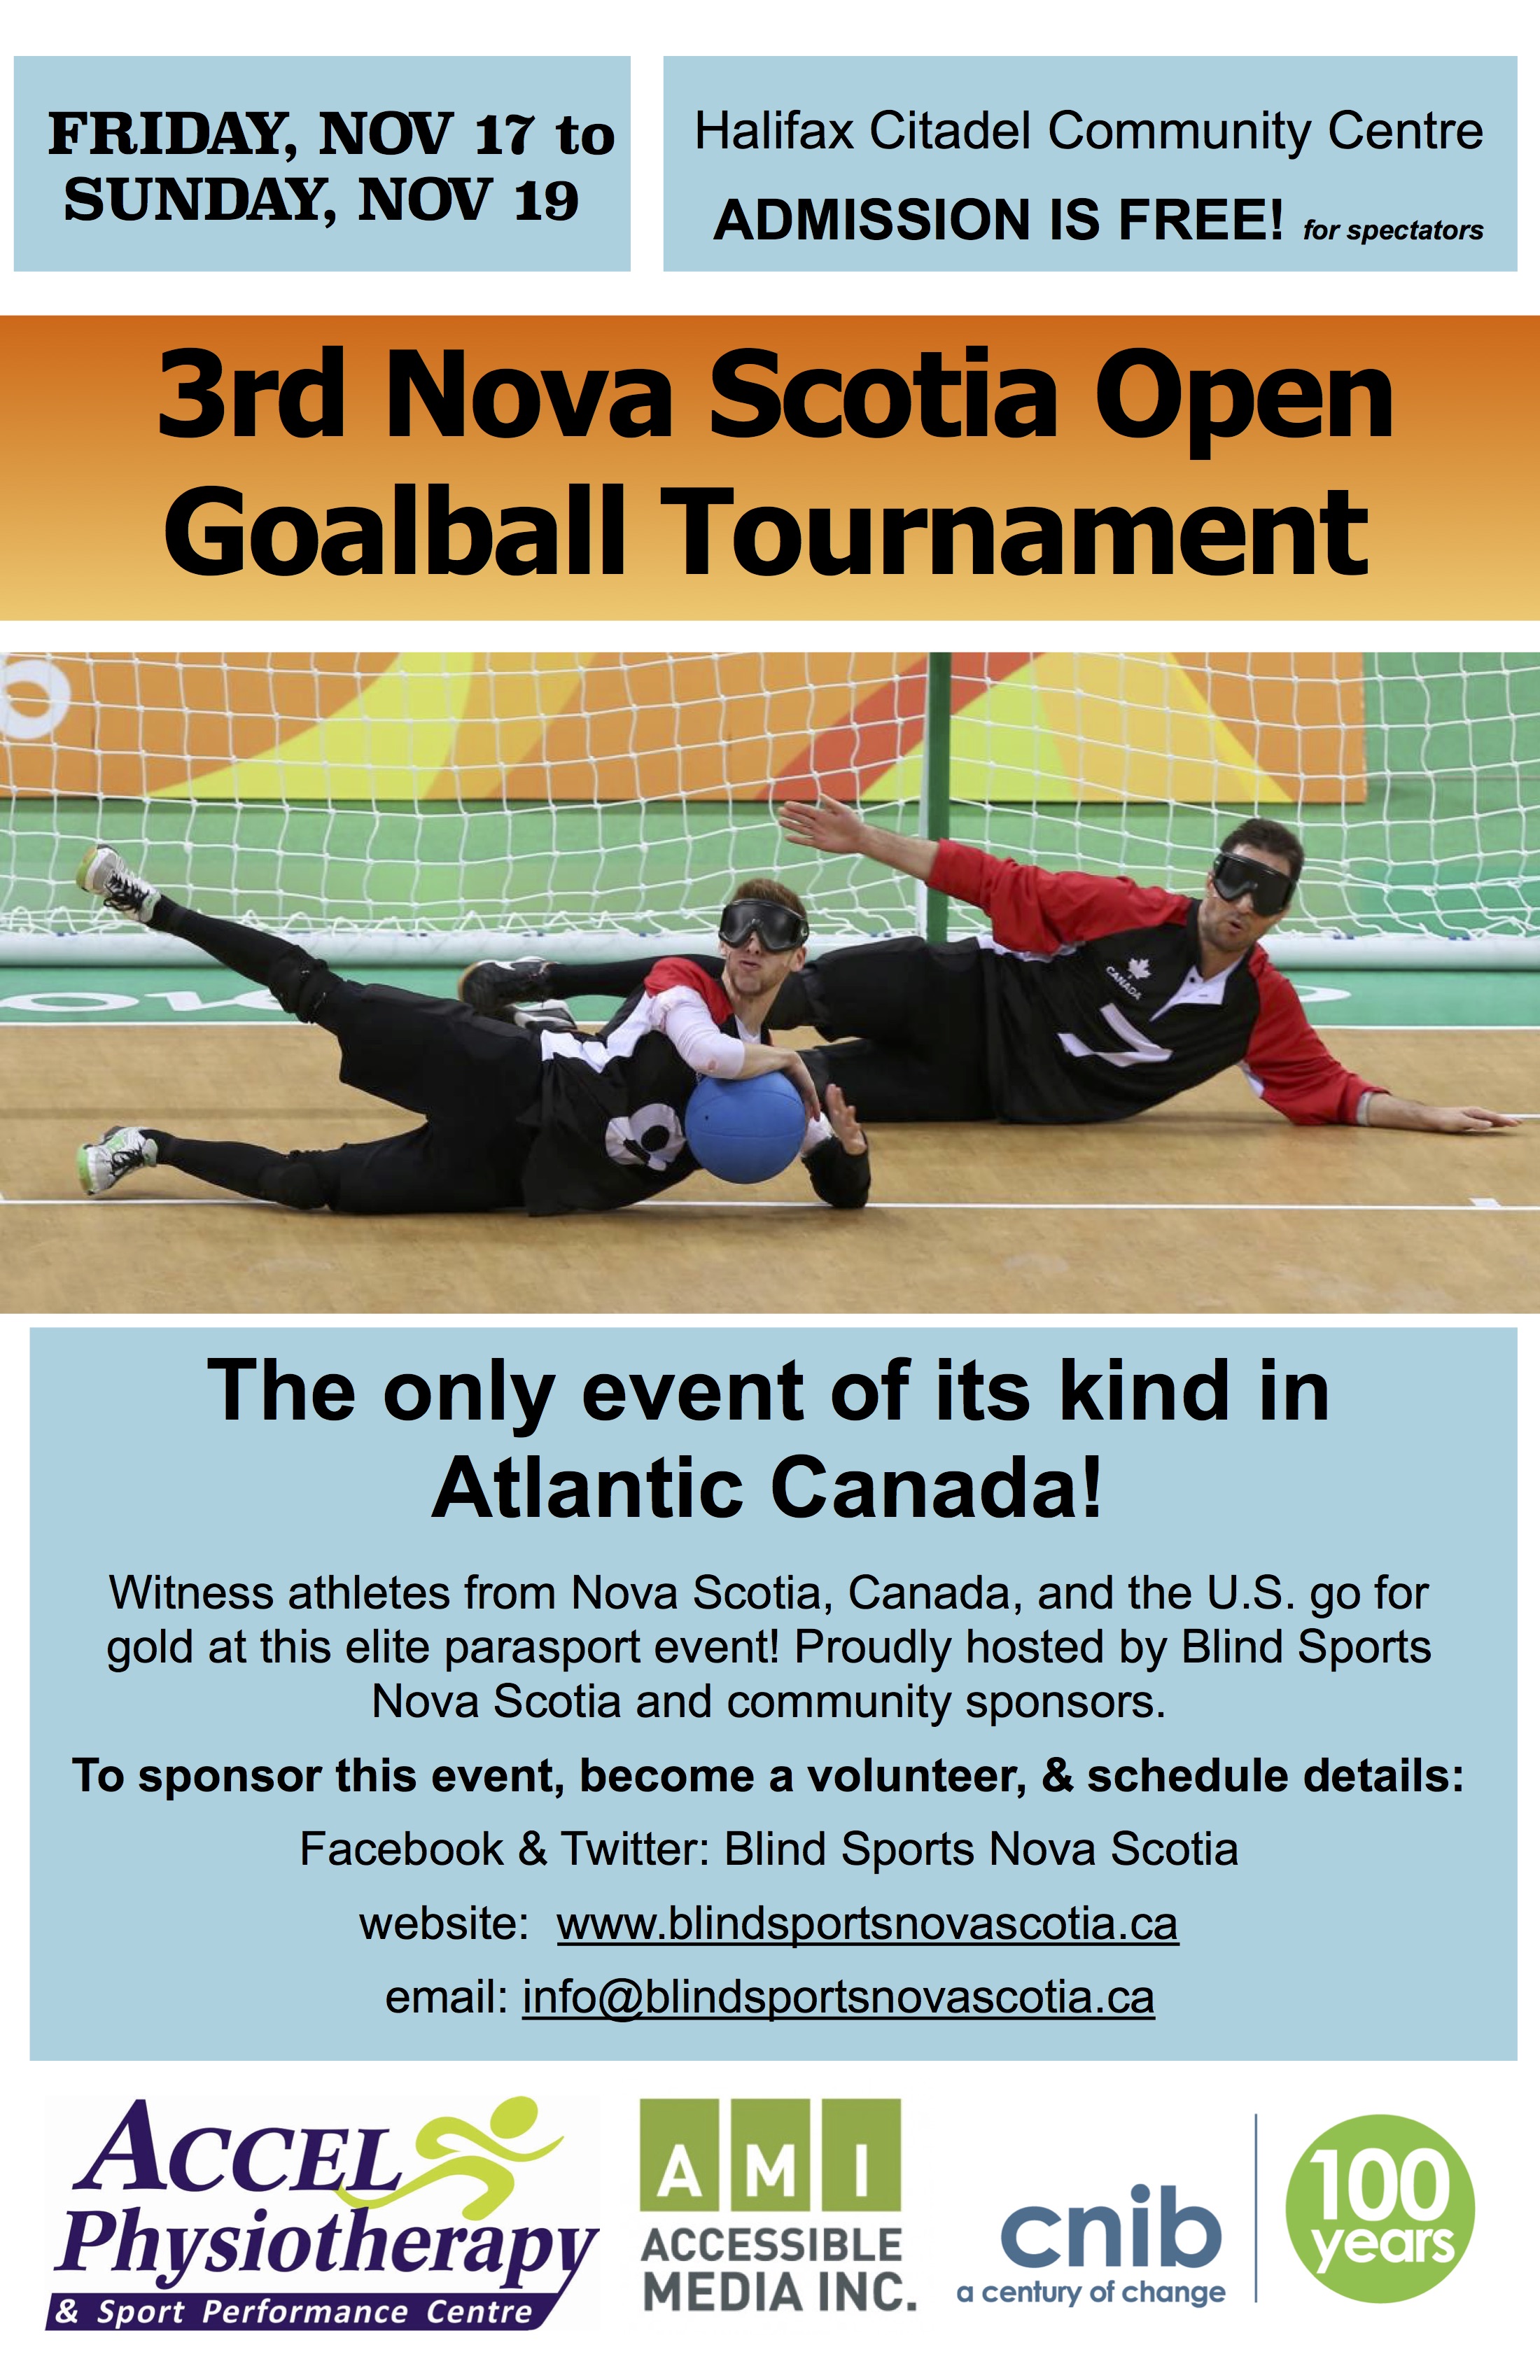 Event poster description: Friday Nov 17 to Sunday, Nov 19. Halifax Citadel Community Centre. Admission is free for spectators! 3rd Nova Scotia Open Goalball Tournament. The only event of its kind in Atlantic Canada! Witness athletes from Nova Scotia, Canada, and the U.S. go for gold at this elite parasport event! Proudly hosted by Blind Sports Nova Scotia and community sponsors. Proudly hosted by Blind Sports Nova Scotia and community sponsors. To sponsor this event or become a volunteer: Facebook & Twitter: Blind Sports Nova Scotia website: www.blindsportsnovascotia.ca email: info@blindsportsnovascotia.ca Sponsors & hosts logos: Accel Physiotherapy & Sport Performance Centre; CNIB; Accessible Media Inc